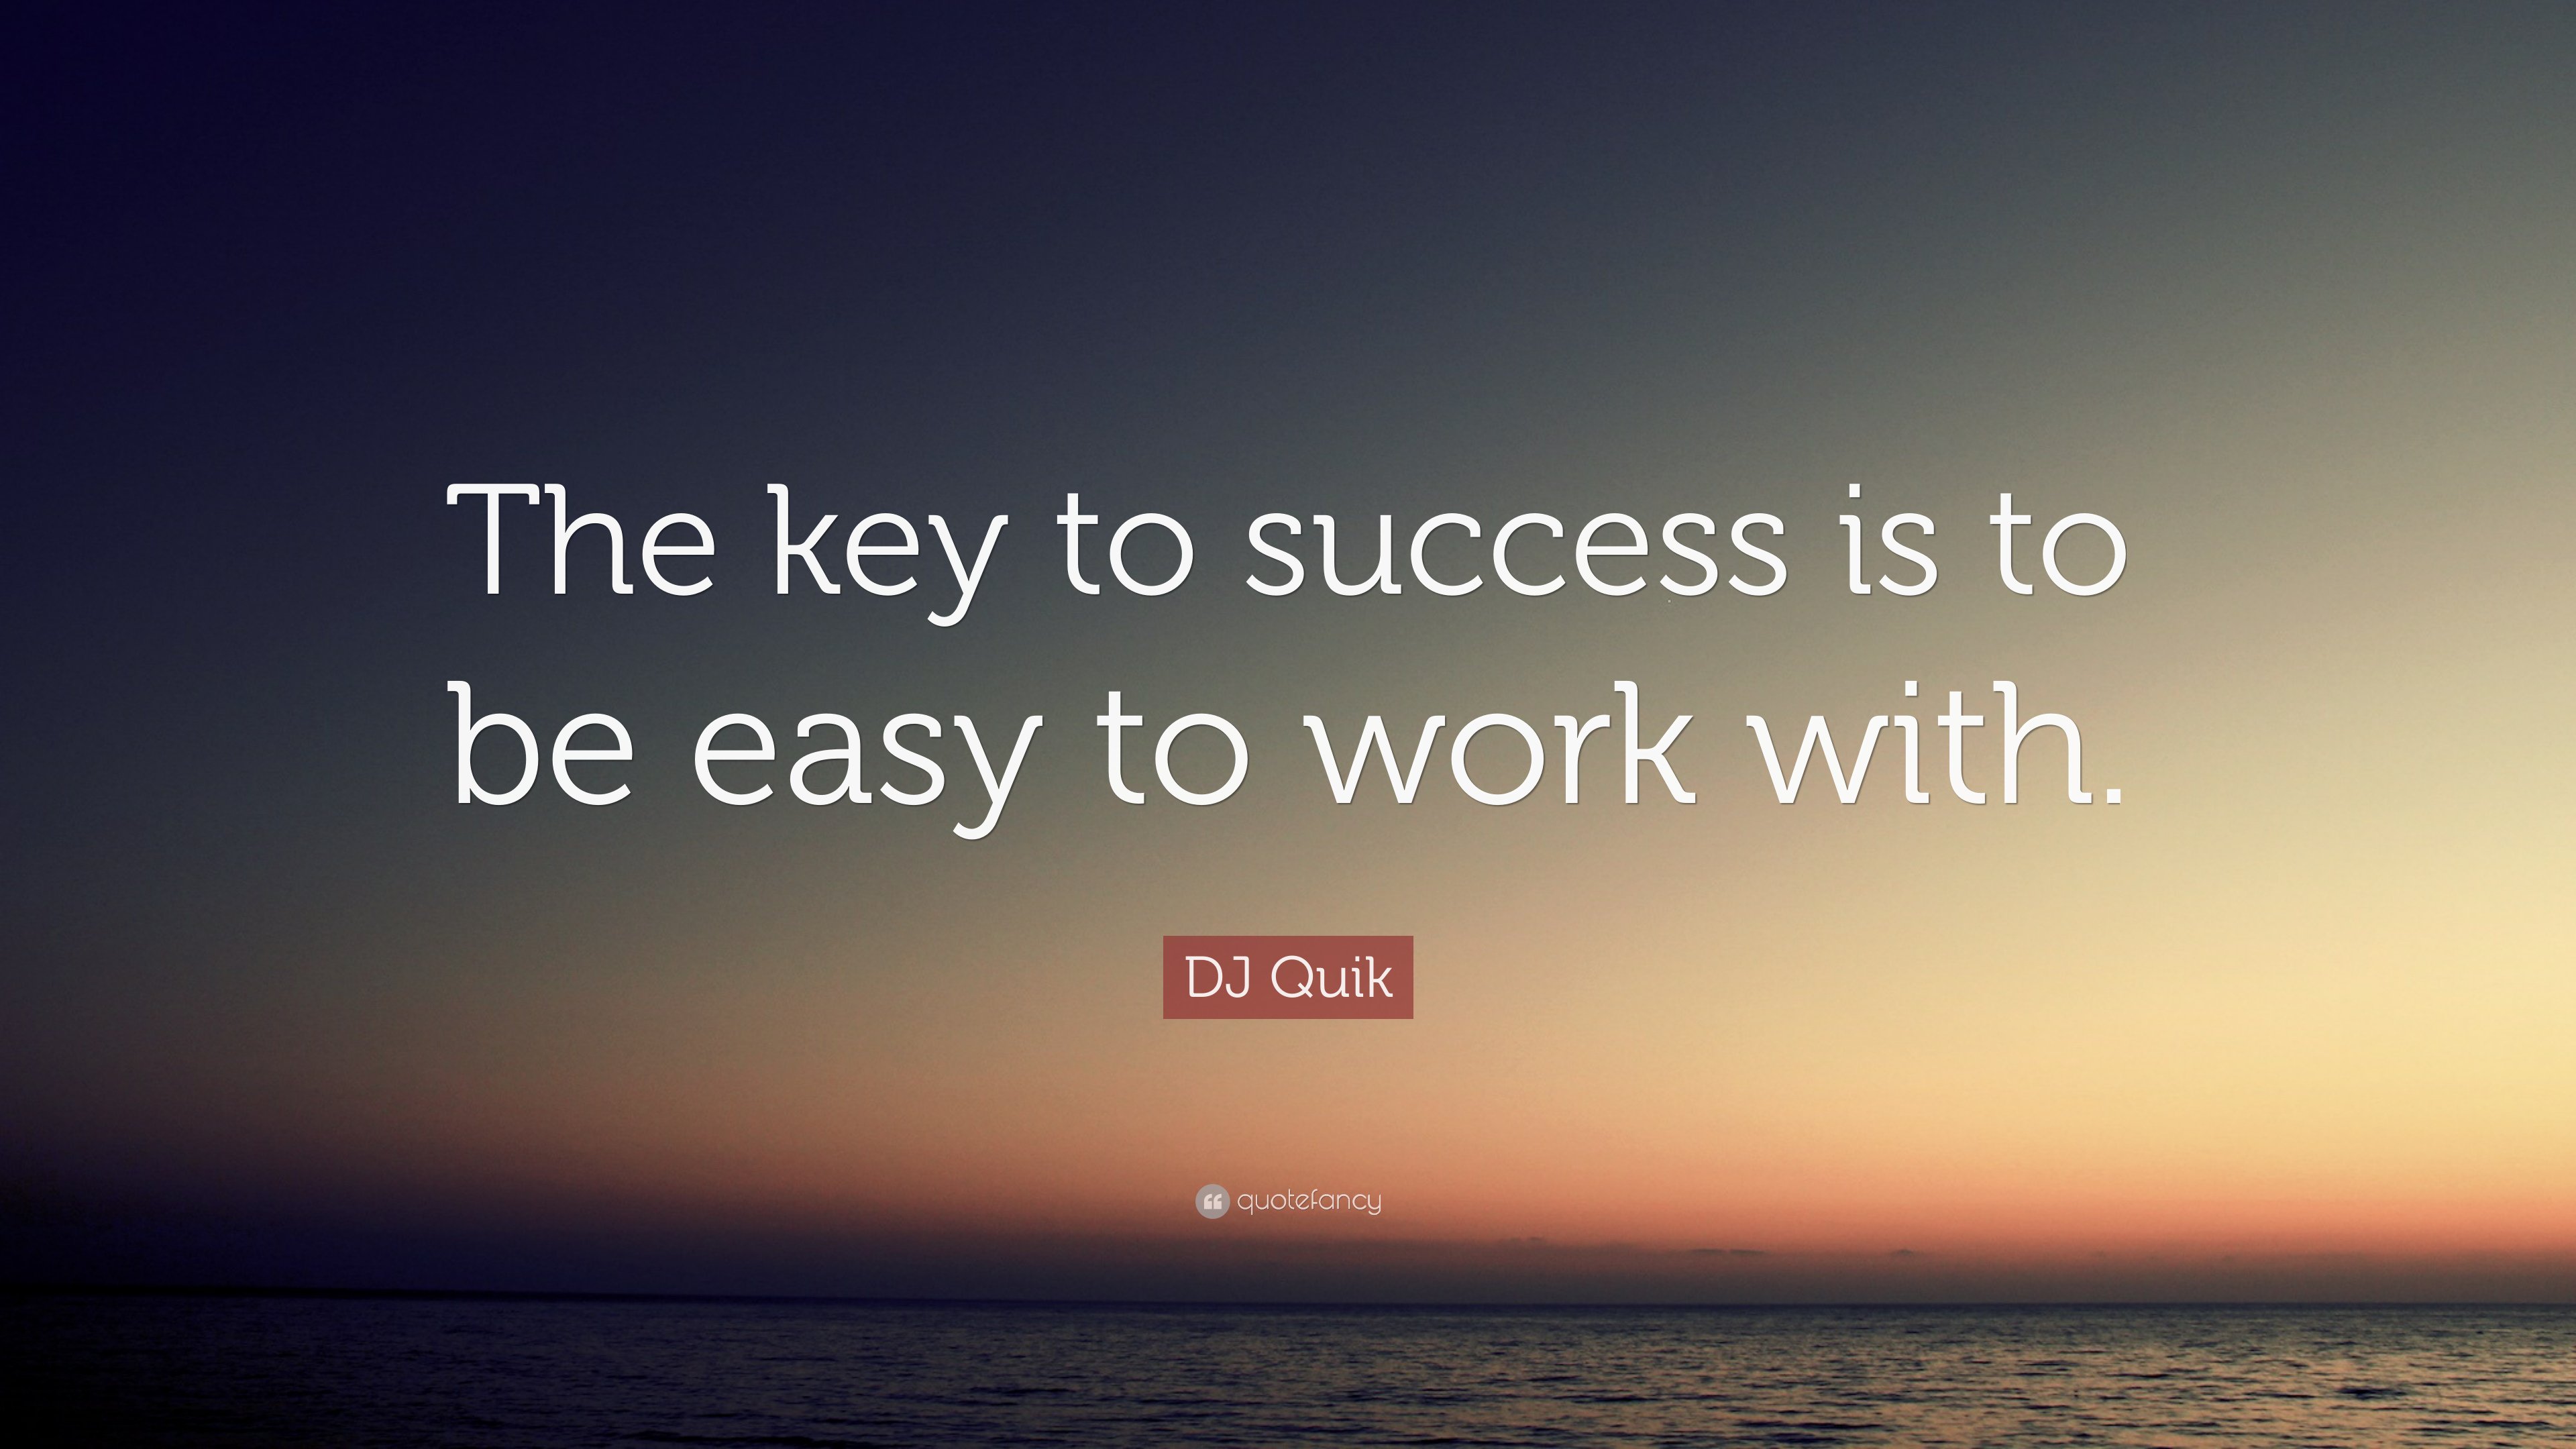 DJ Quik Quote: “The key to success is to be easy to work